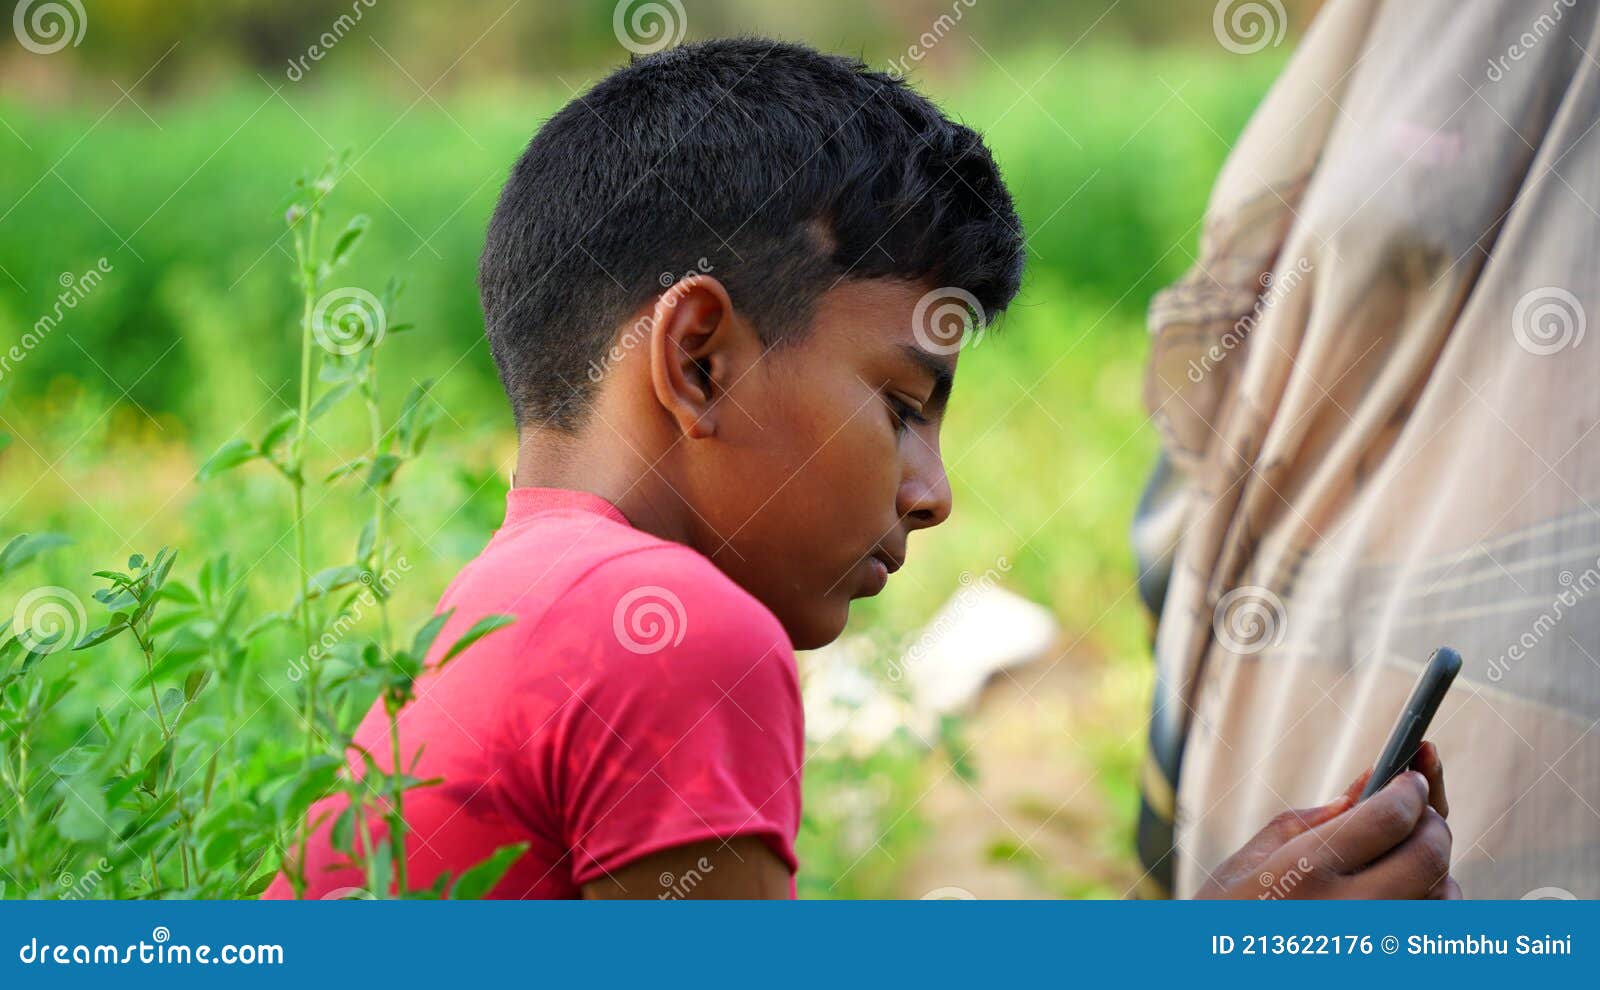 Side View Shot of an Little Indian Boy with Stylish Hair Cutting. Toddler  Boy Seeing at the Camera with Attractive Black Air Stock Photo - Image of  lifestyle, communication: 213622176